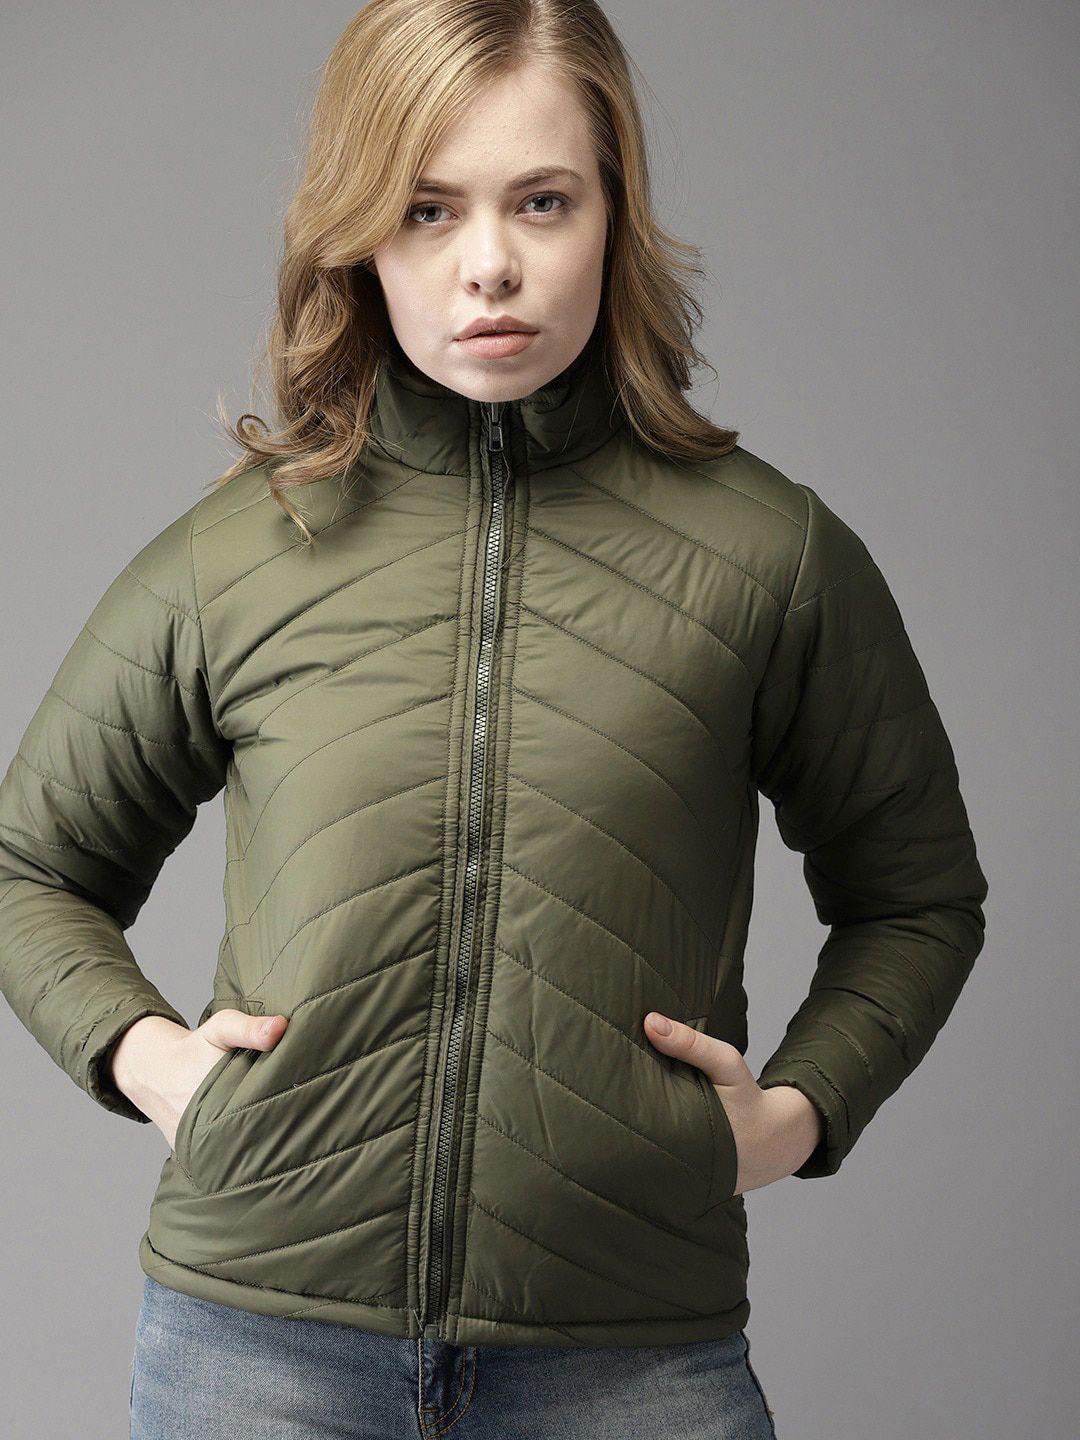 campus sutra women olive green striped windcheater outdoor puffer jacket